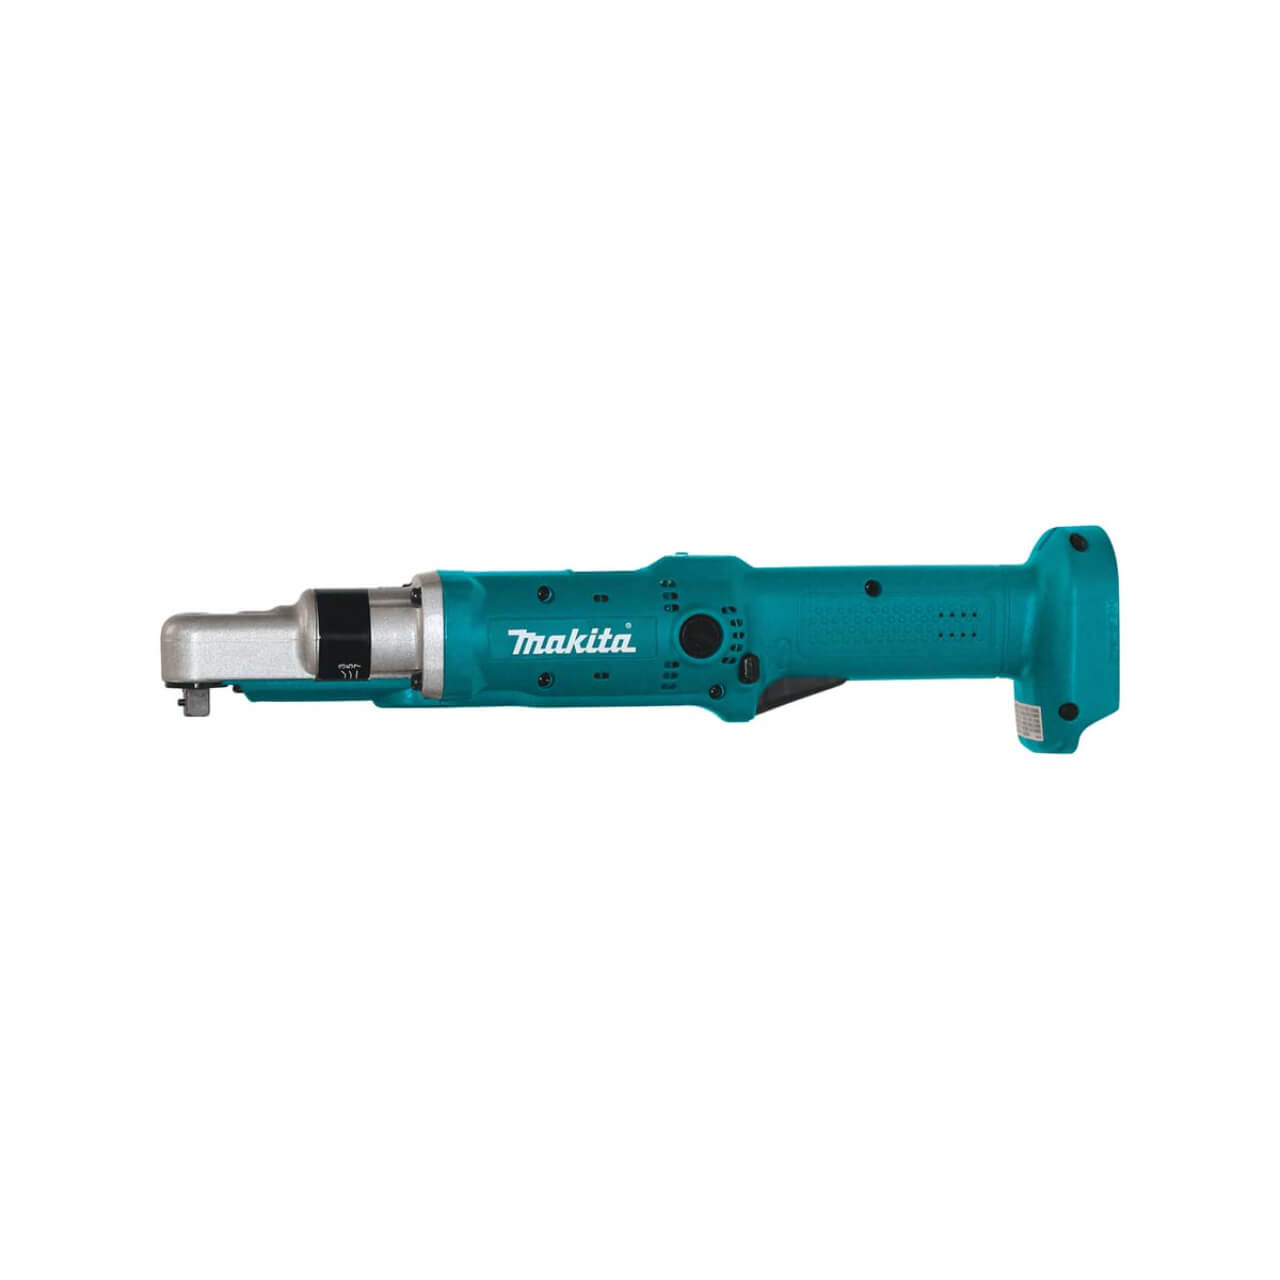 Makita 14.4V 3/8” Angled Torque Wrench. 5-12Nm. 410rpm - Tool Only